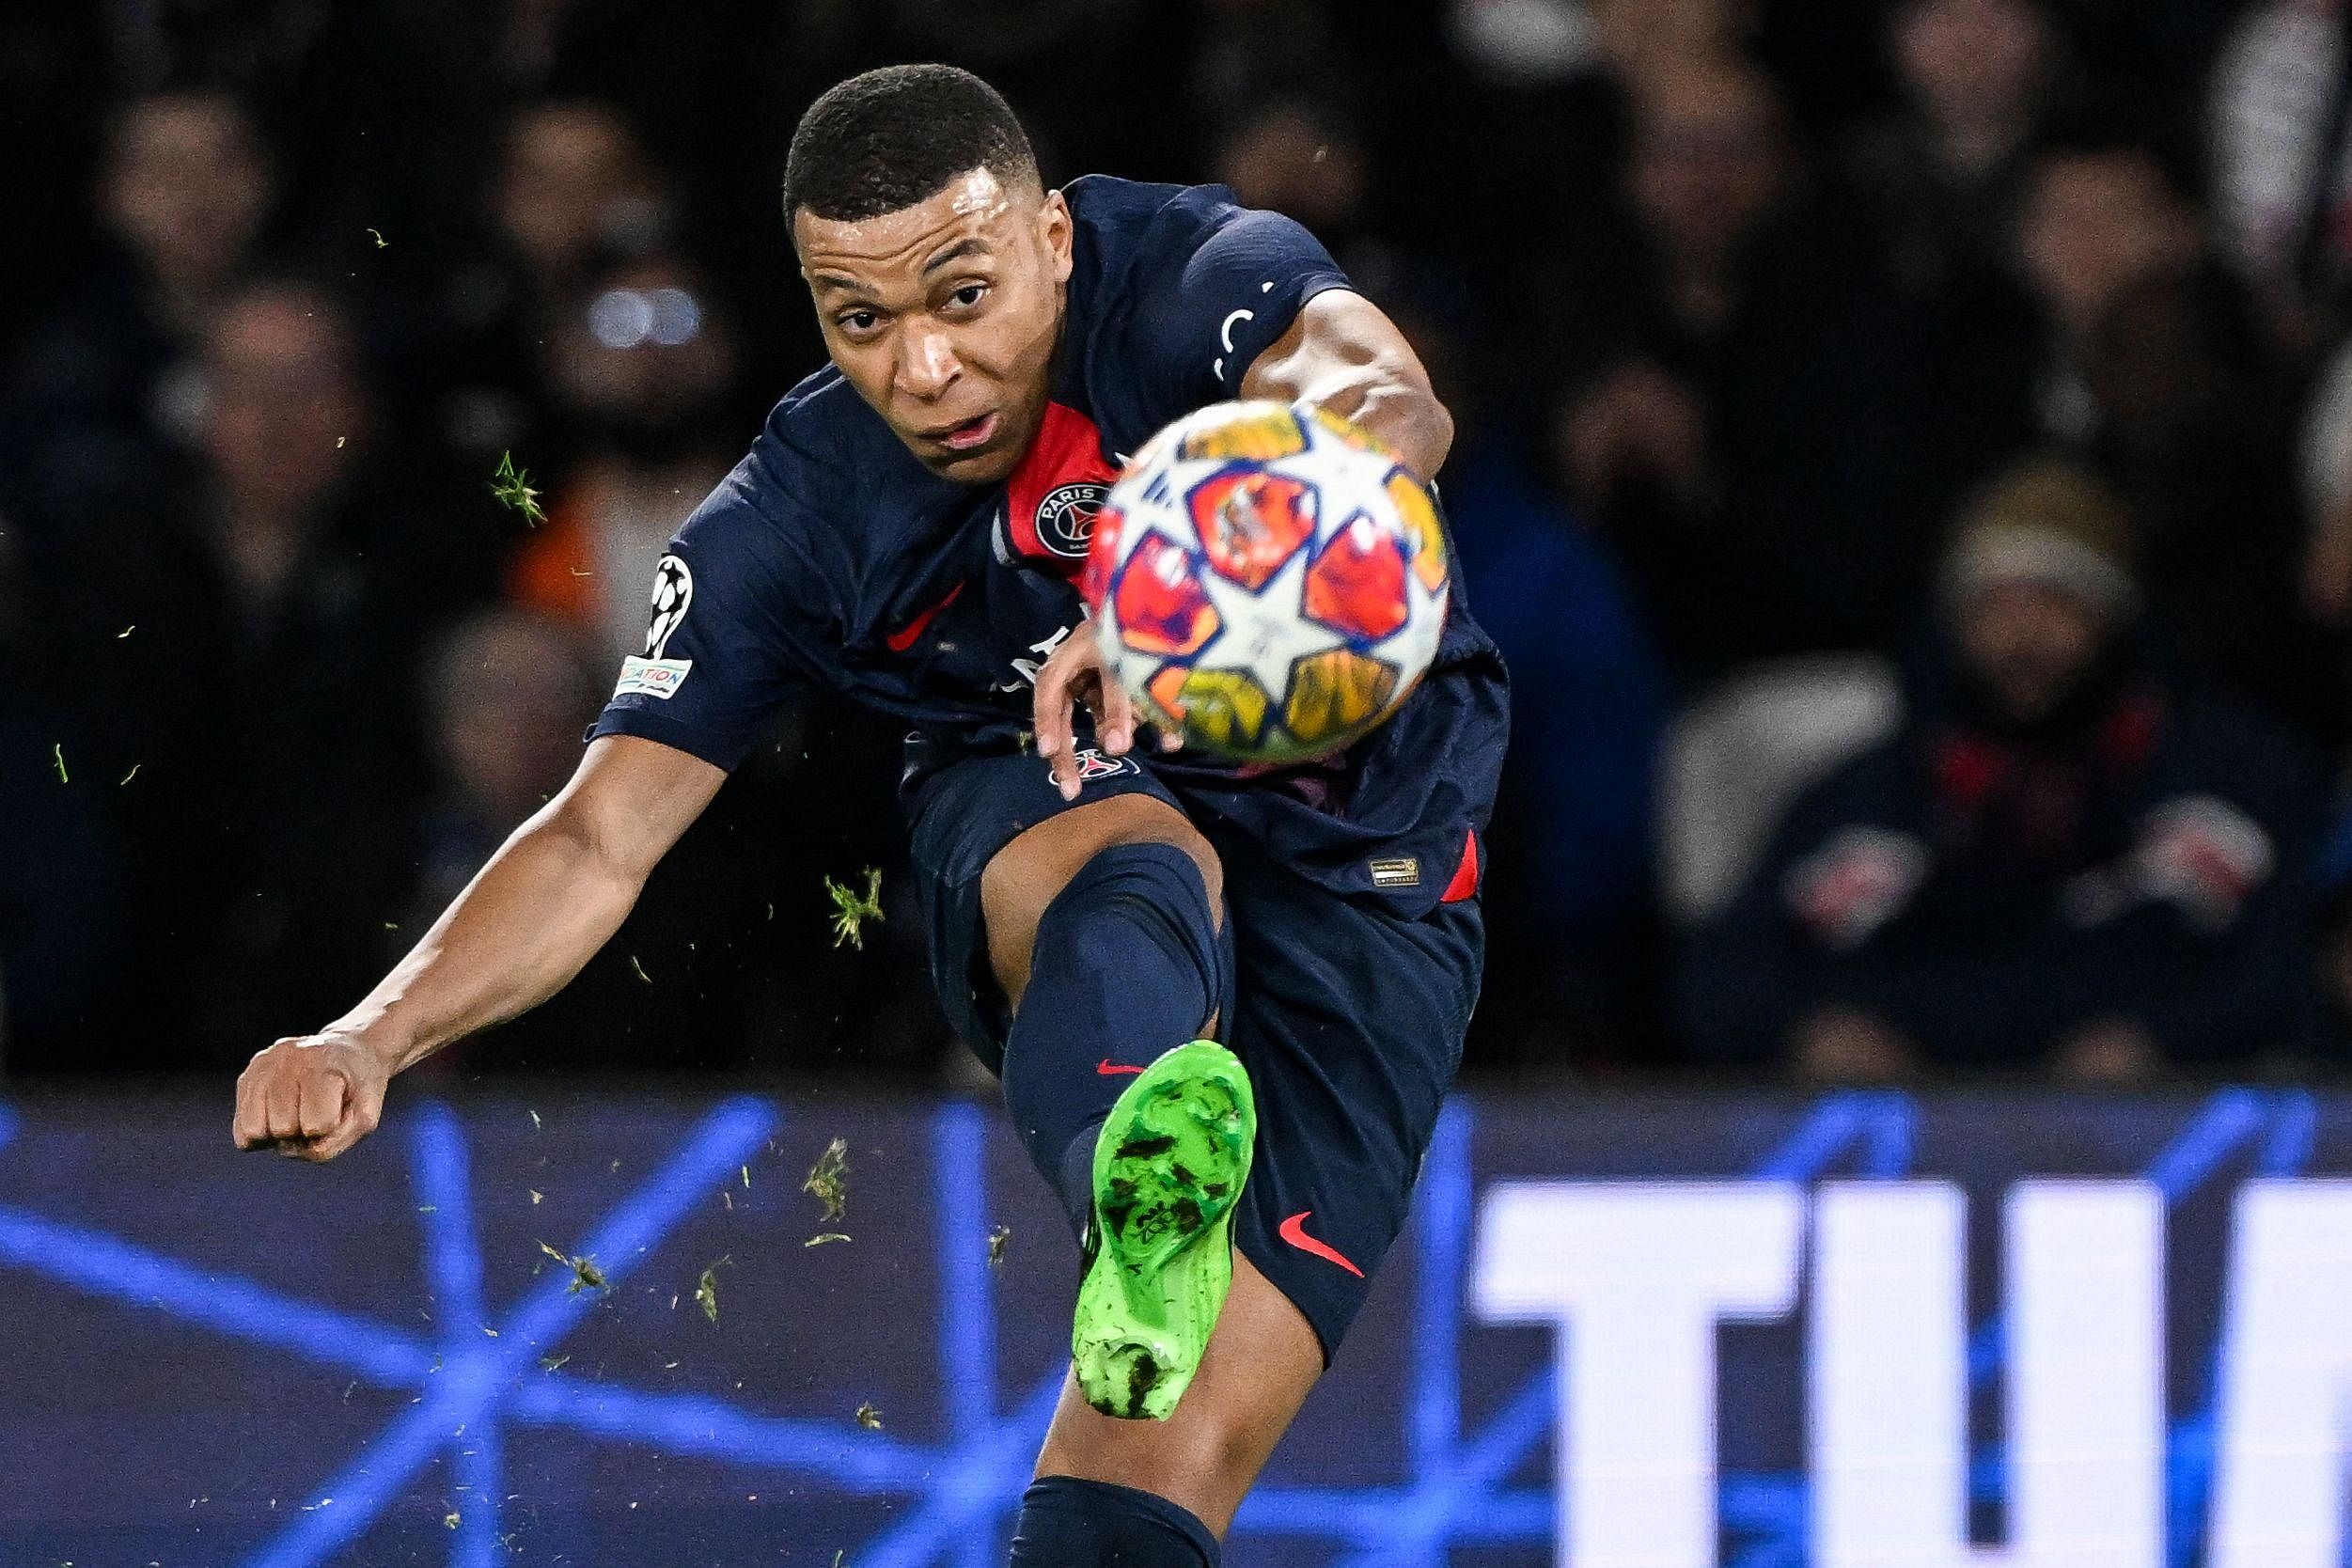 Kylian Mbappe tells PSG he plans to leave as saga draws to close